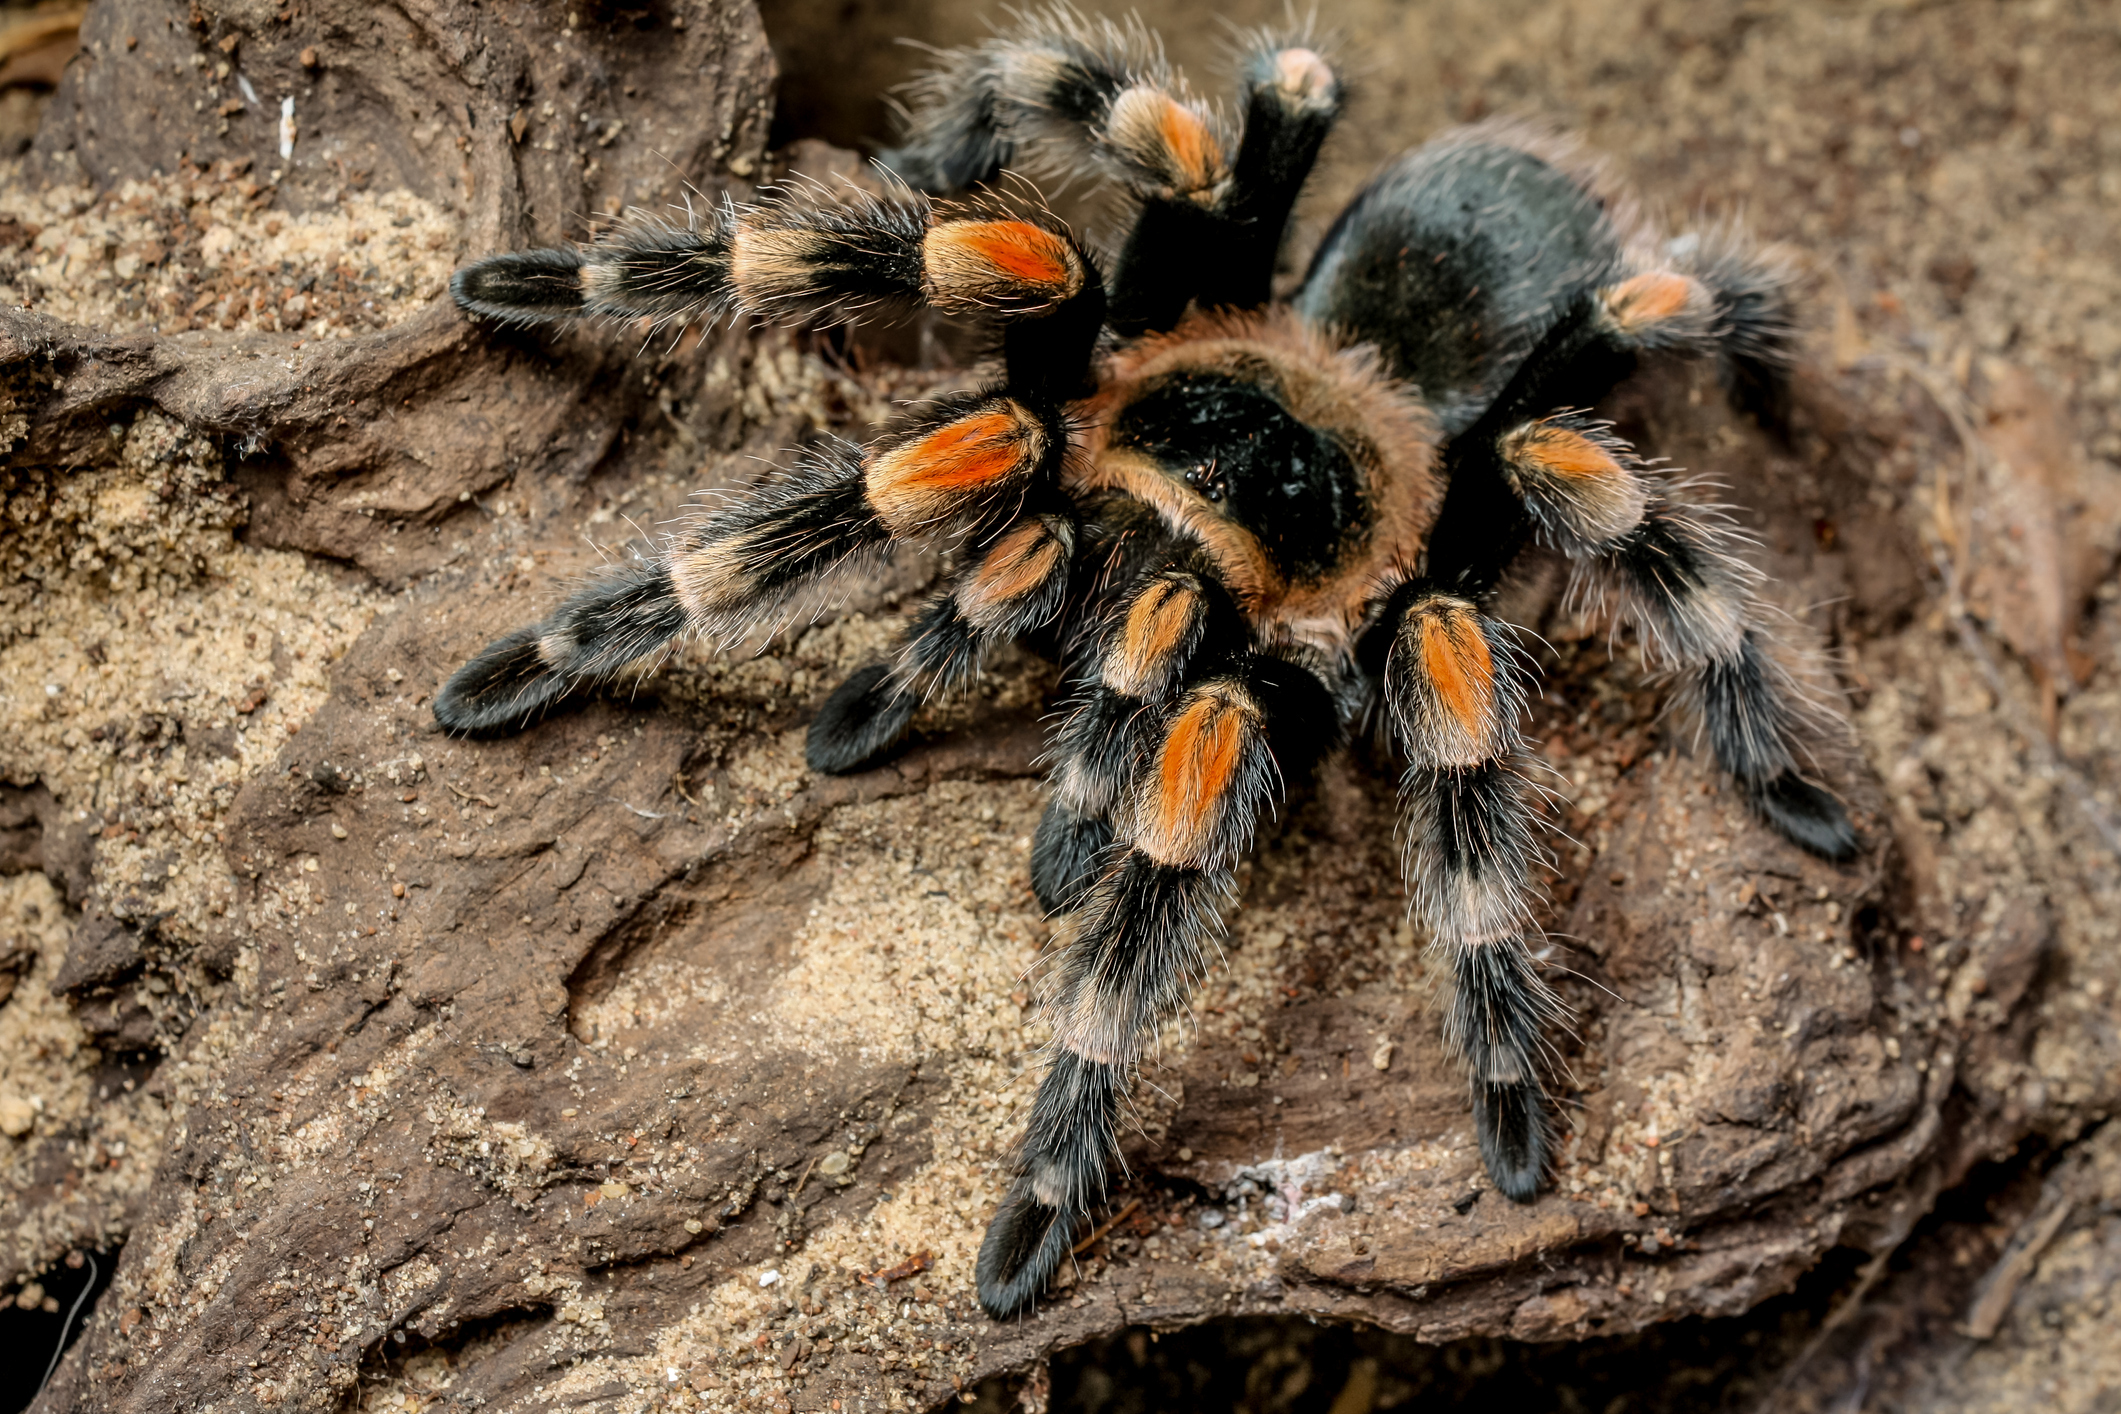 Tarantula guide: what they are, what they eat, where they live - and just why these spiders are so feared